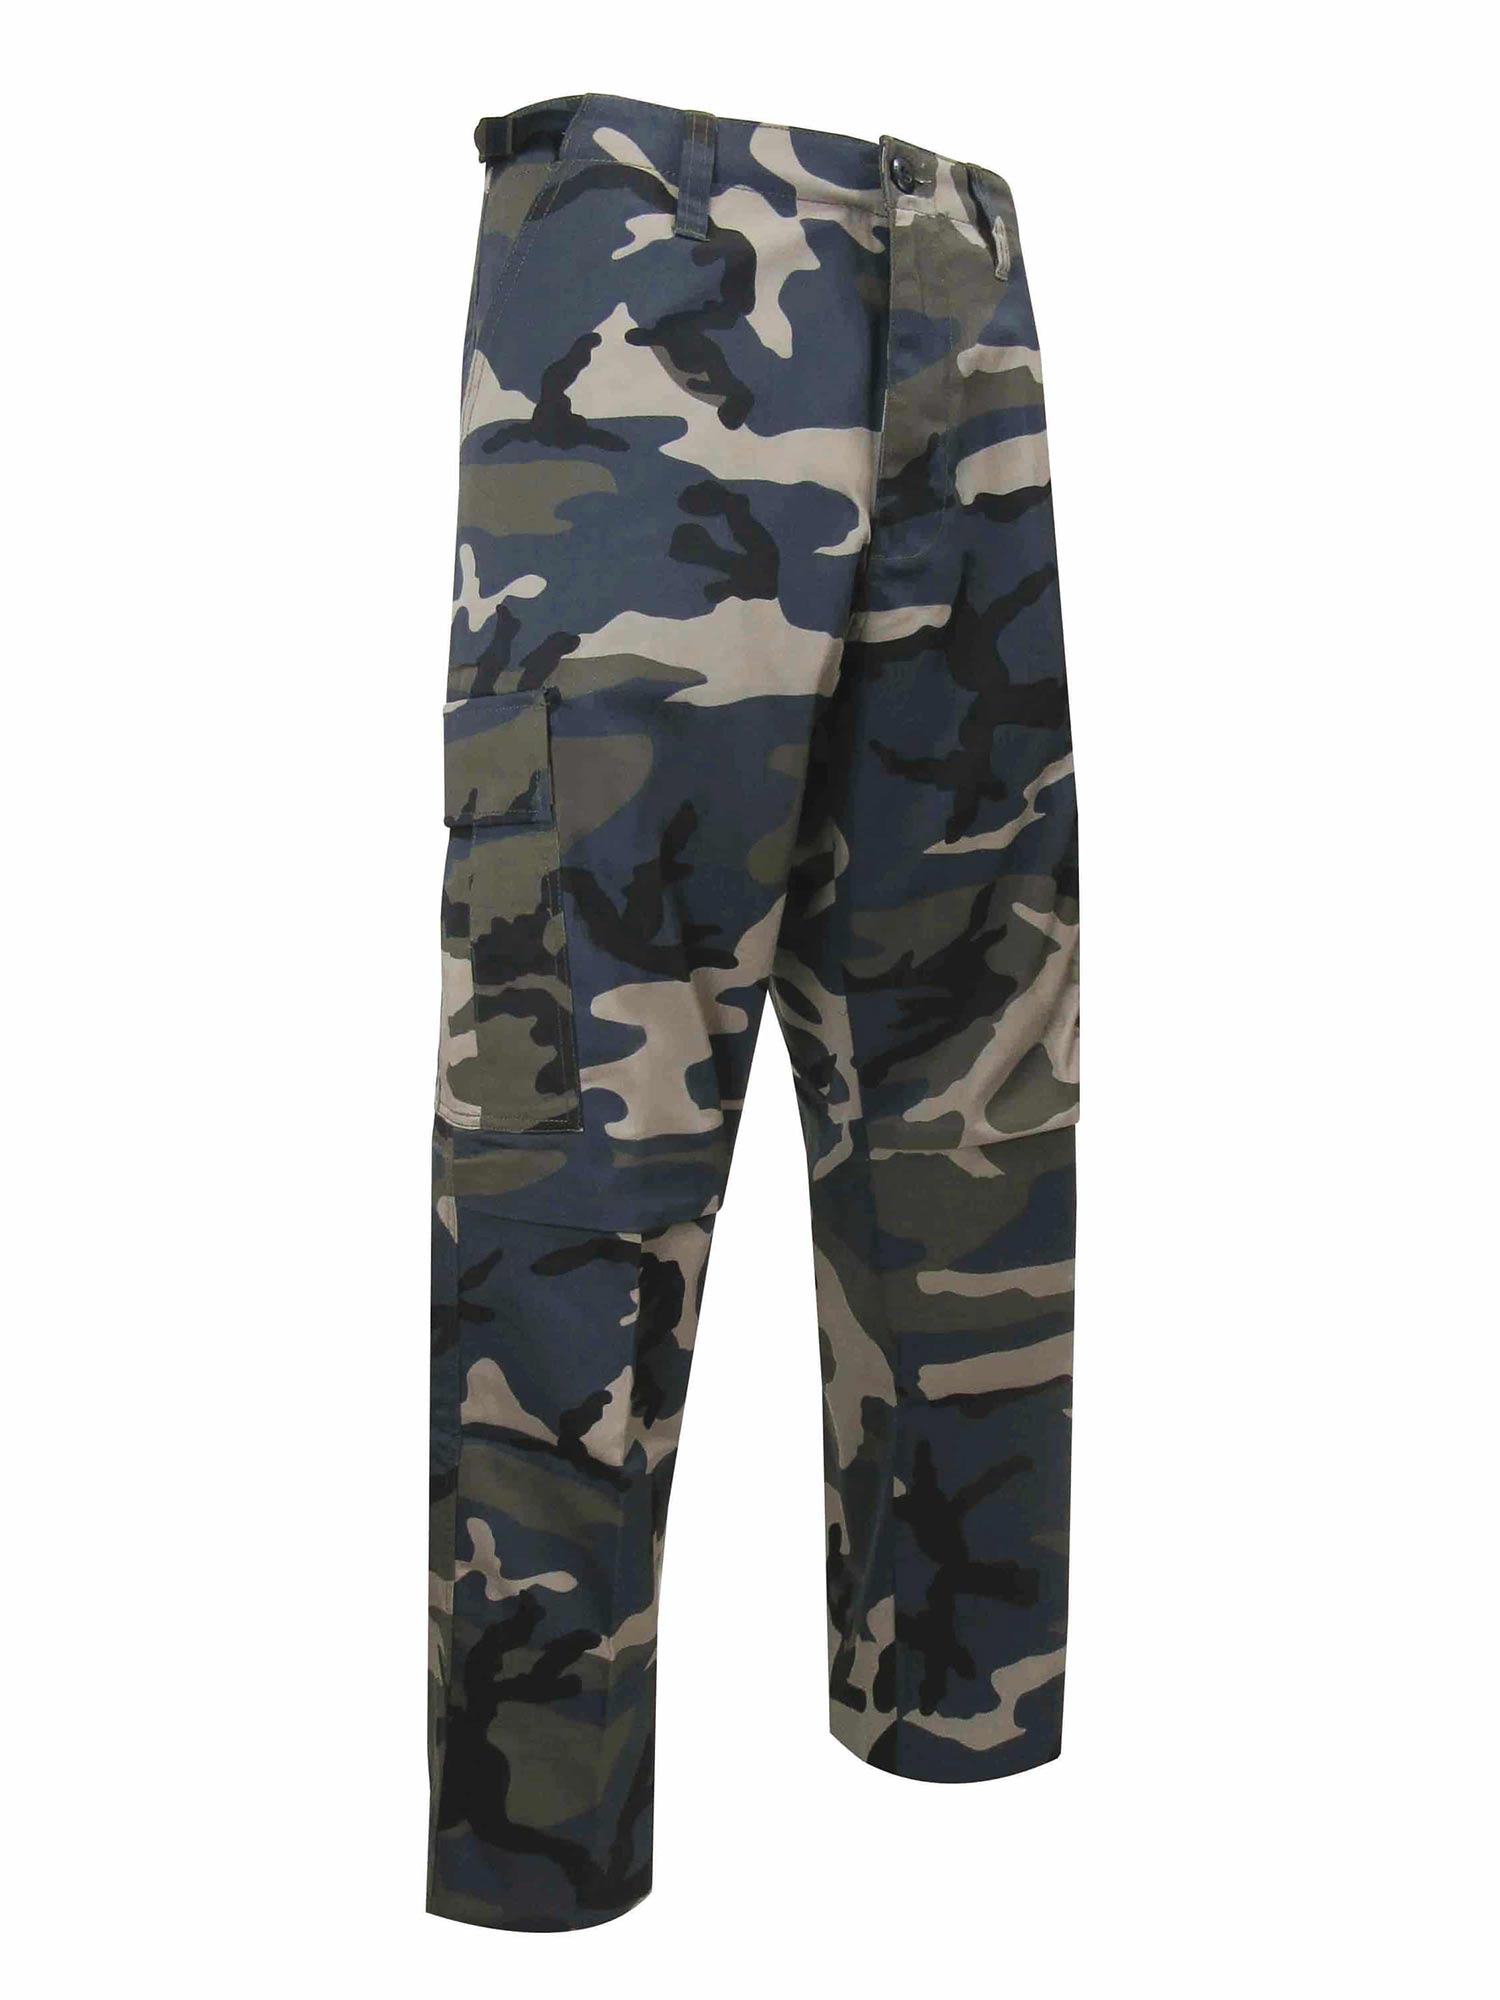 Buy Camo Pants All Sizes 80s 90s Cargo Pants Camouflage Combat Grunge  Skater Punk Woodland BDU Utility Military Issue Army Mens or Womens Online  in India - Etsy